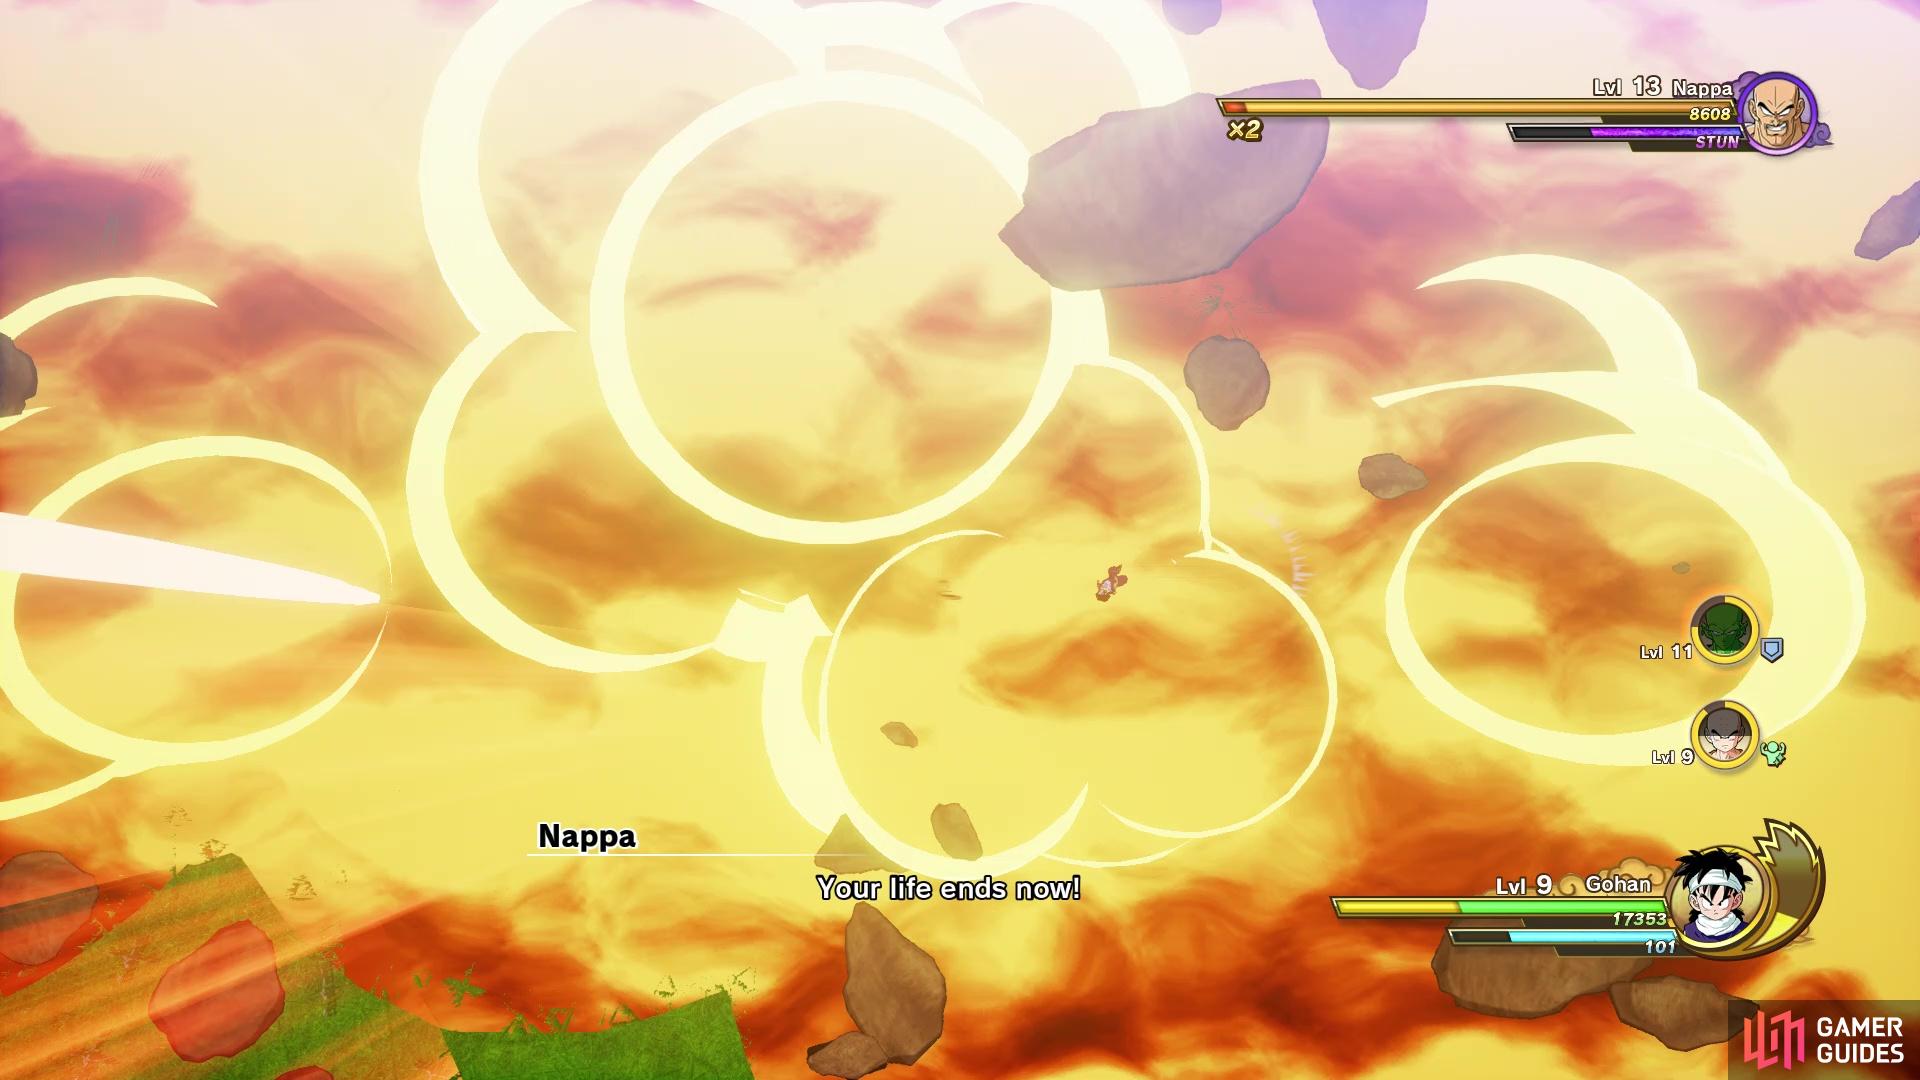 Blazing Storm covers a large range, but moving towards the screen will allow you to dodge it